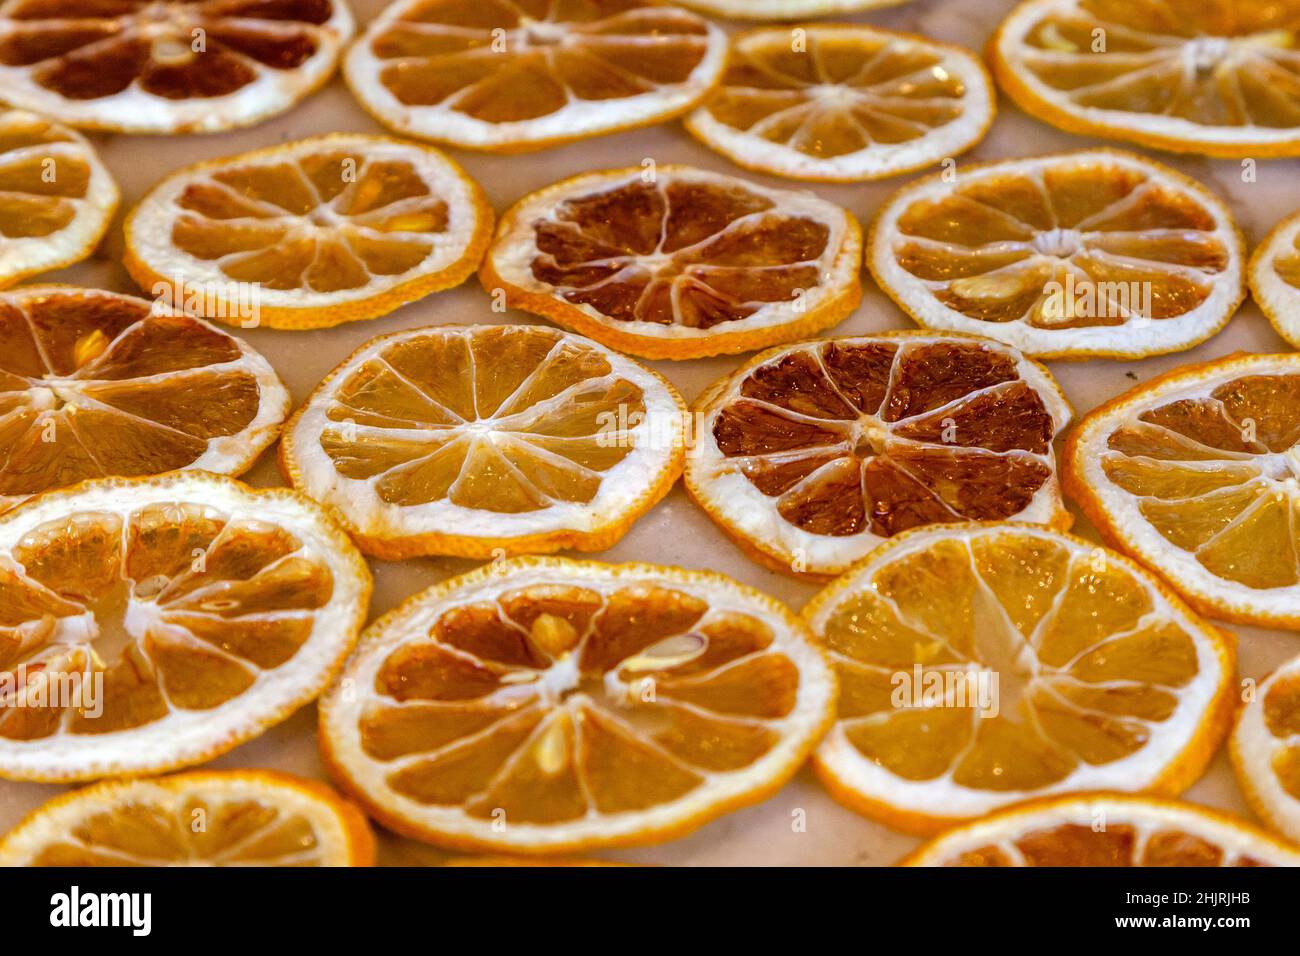 Dried oranges and lemons on a marble counter Stock Photo